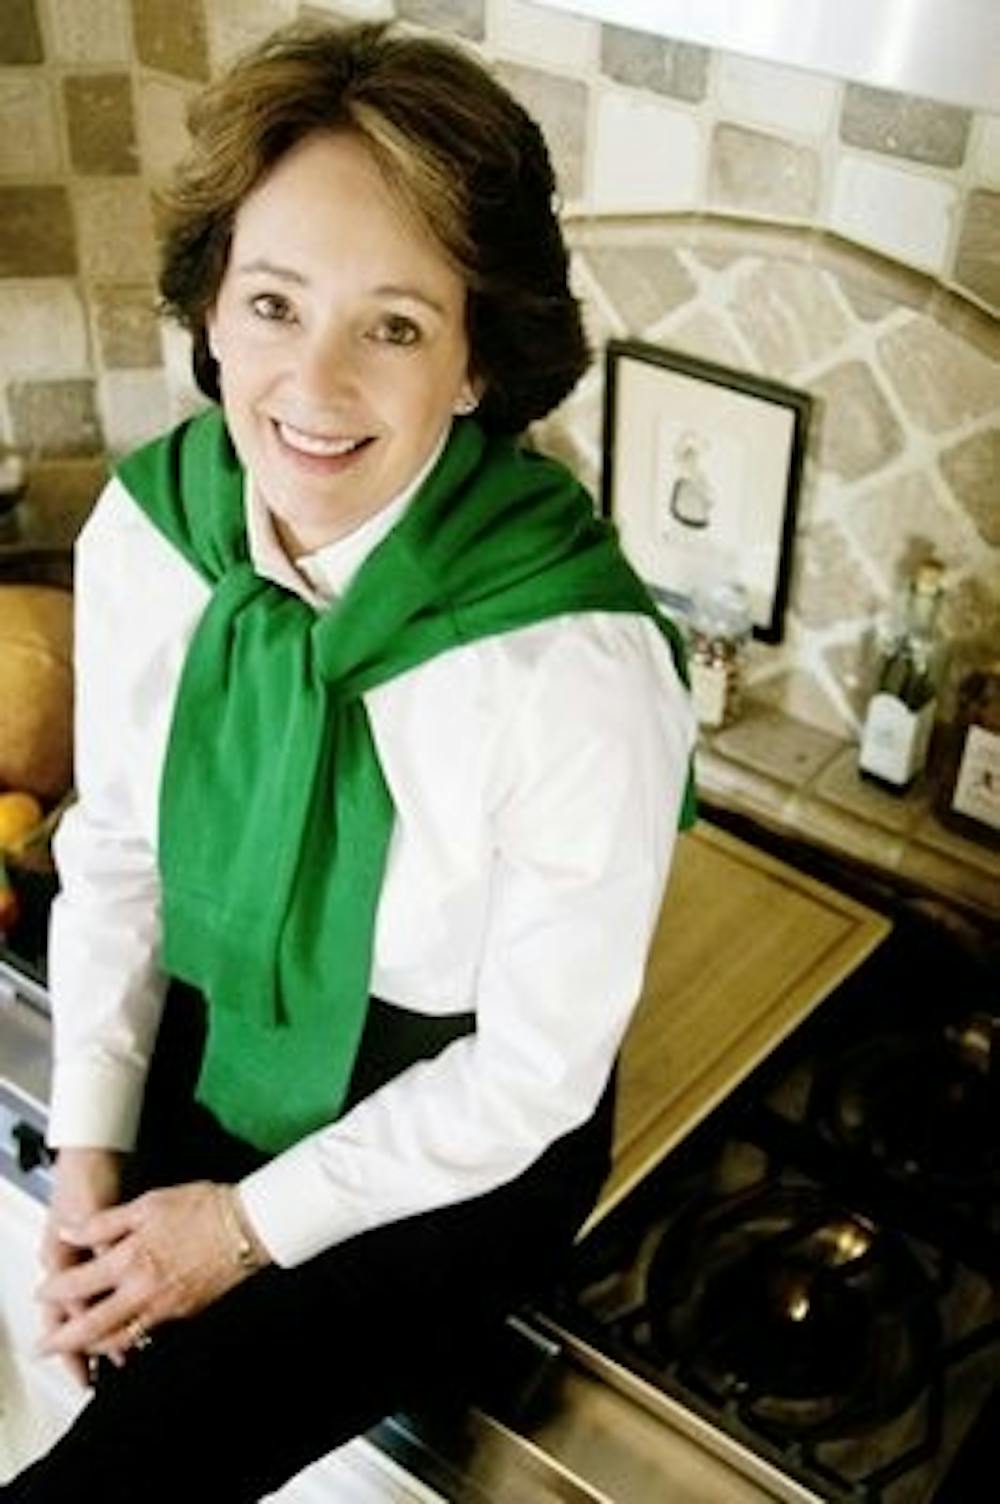 Patricia Barnes sits in a kitchen similar to the one that inspired her rolls. (Contributed by Amanda Layton)